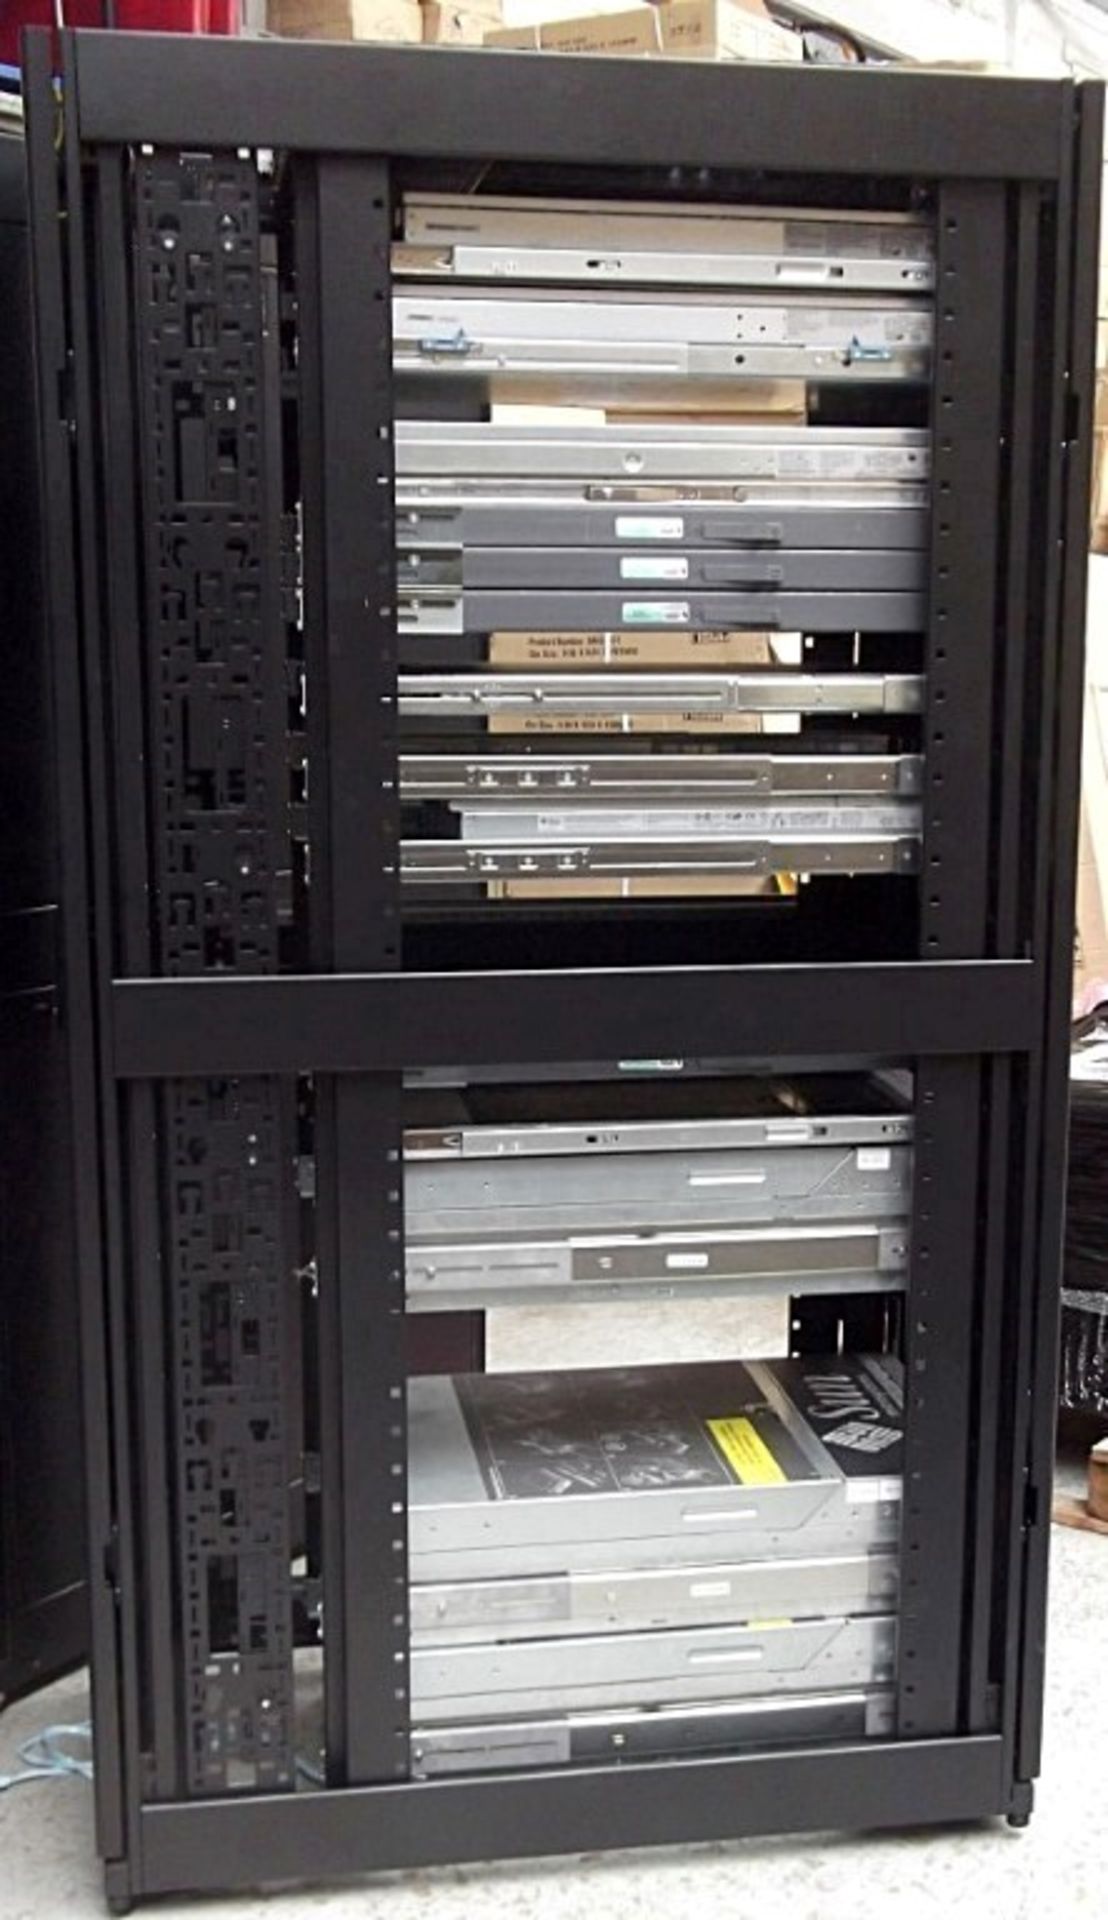 1 x APC Netshelter Server Rack With 12 x Assorted Sun Fire & HP Proliant Filer Systems Including - Image 3 of 8